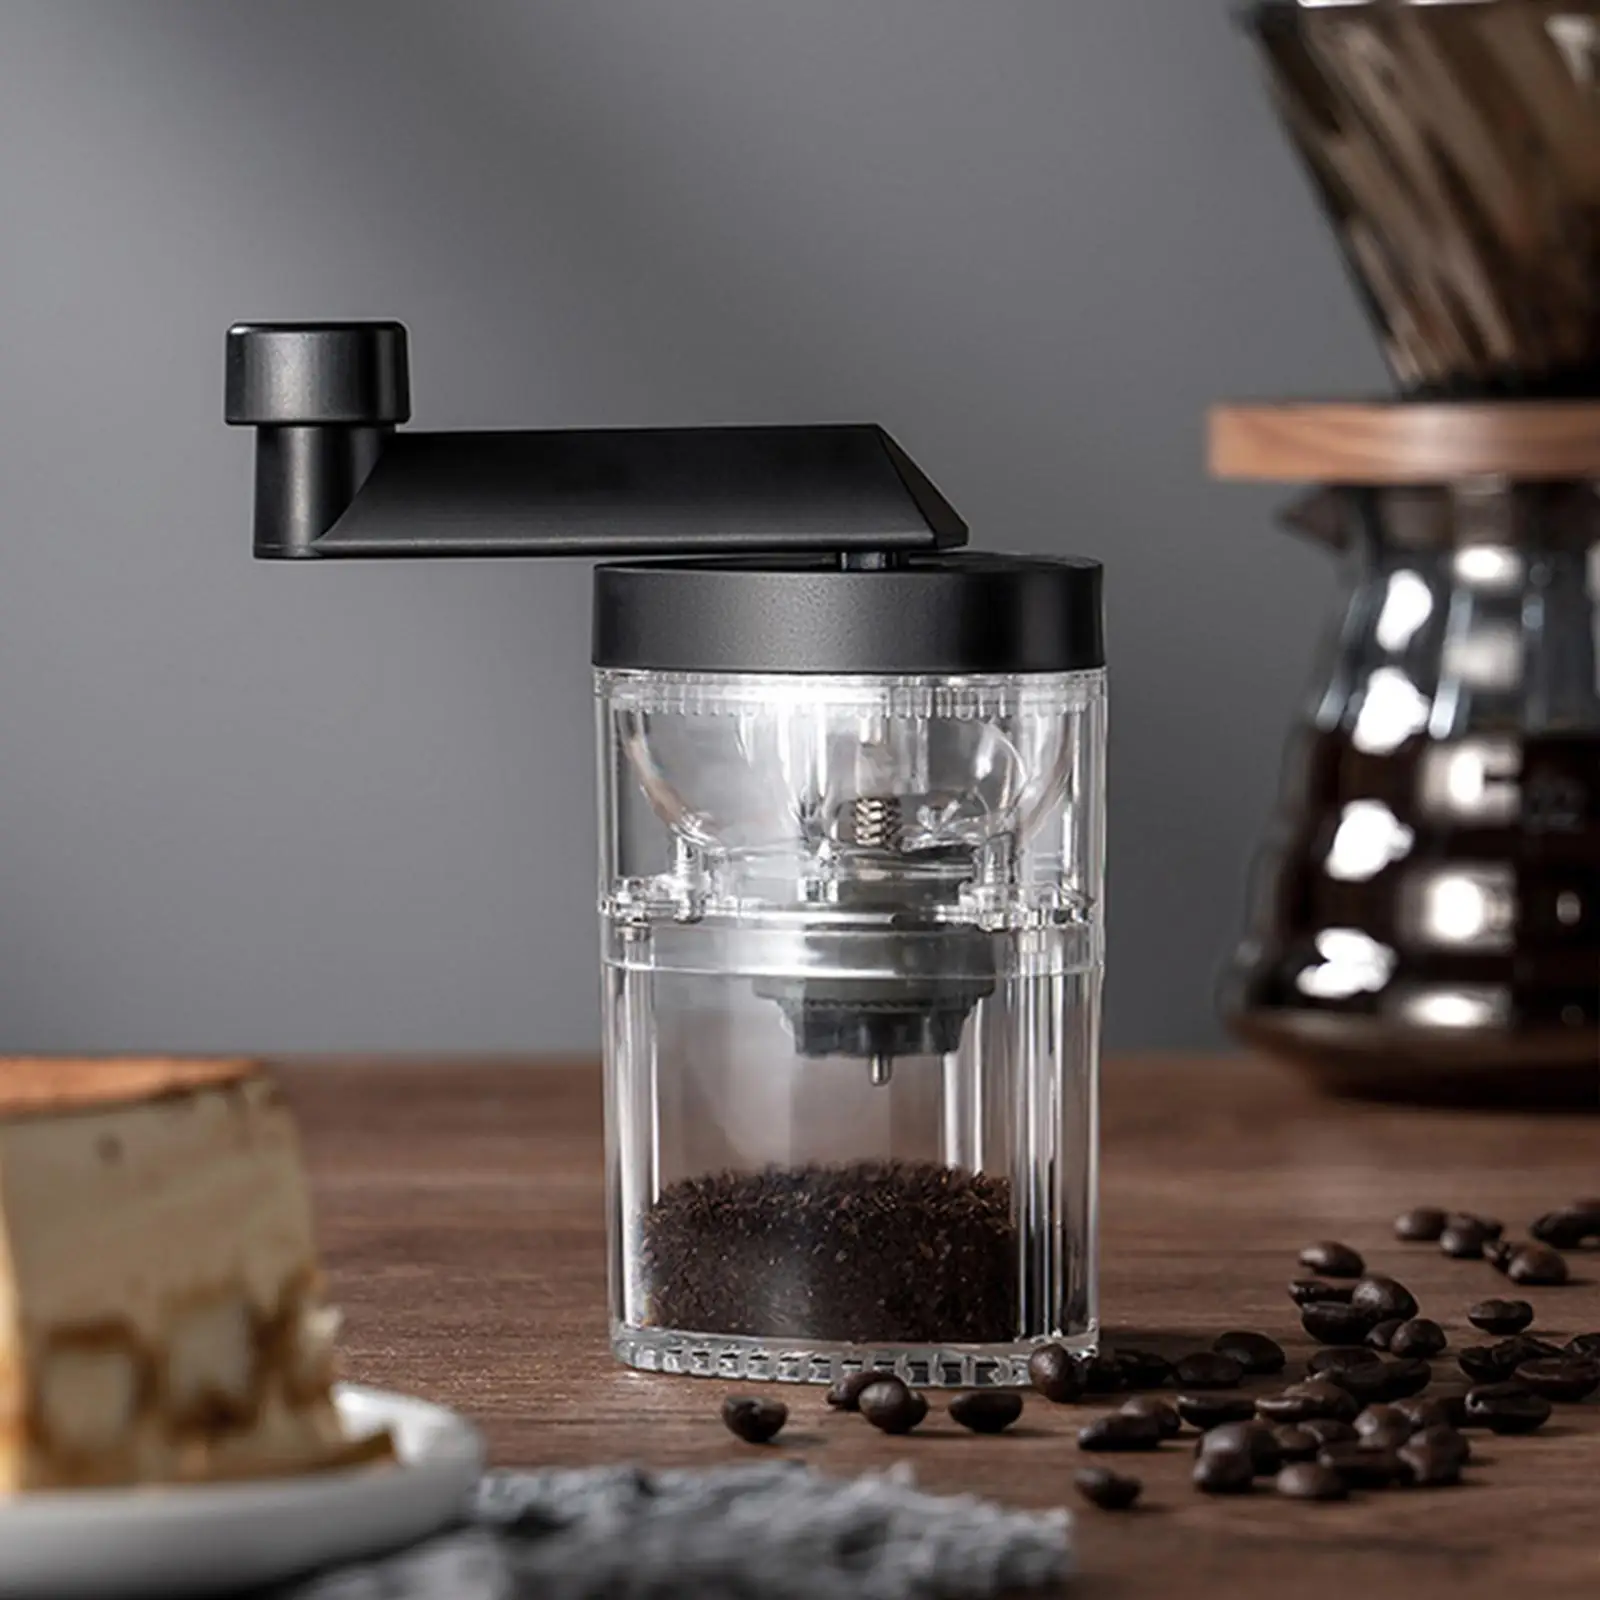 Manual Burr Coffee Grinder Adjustable Settings Hand Crank Manual Coffee Grinder Hand Coffee Mill for Camping Home Office Travel